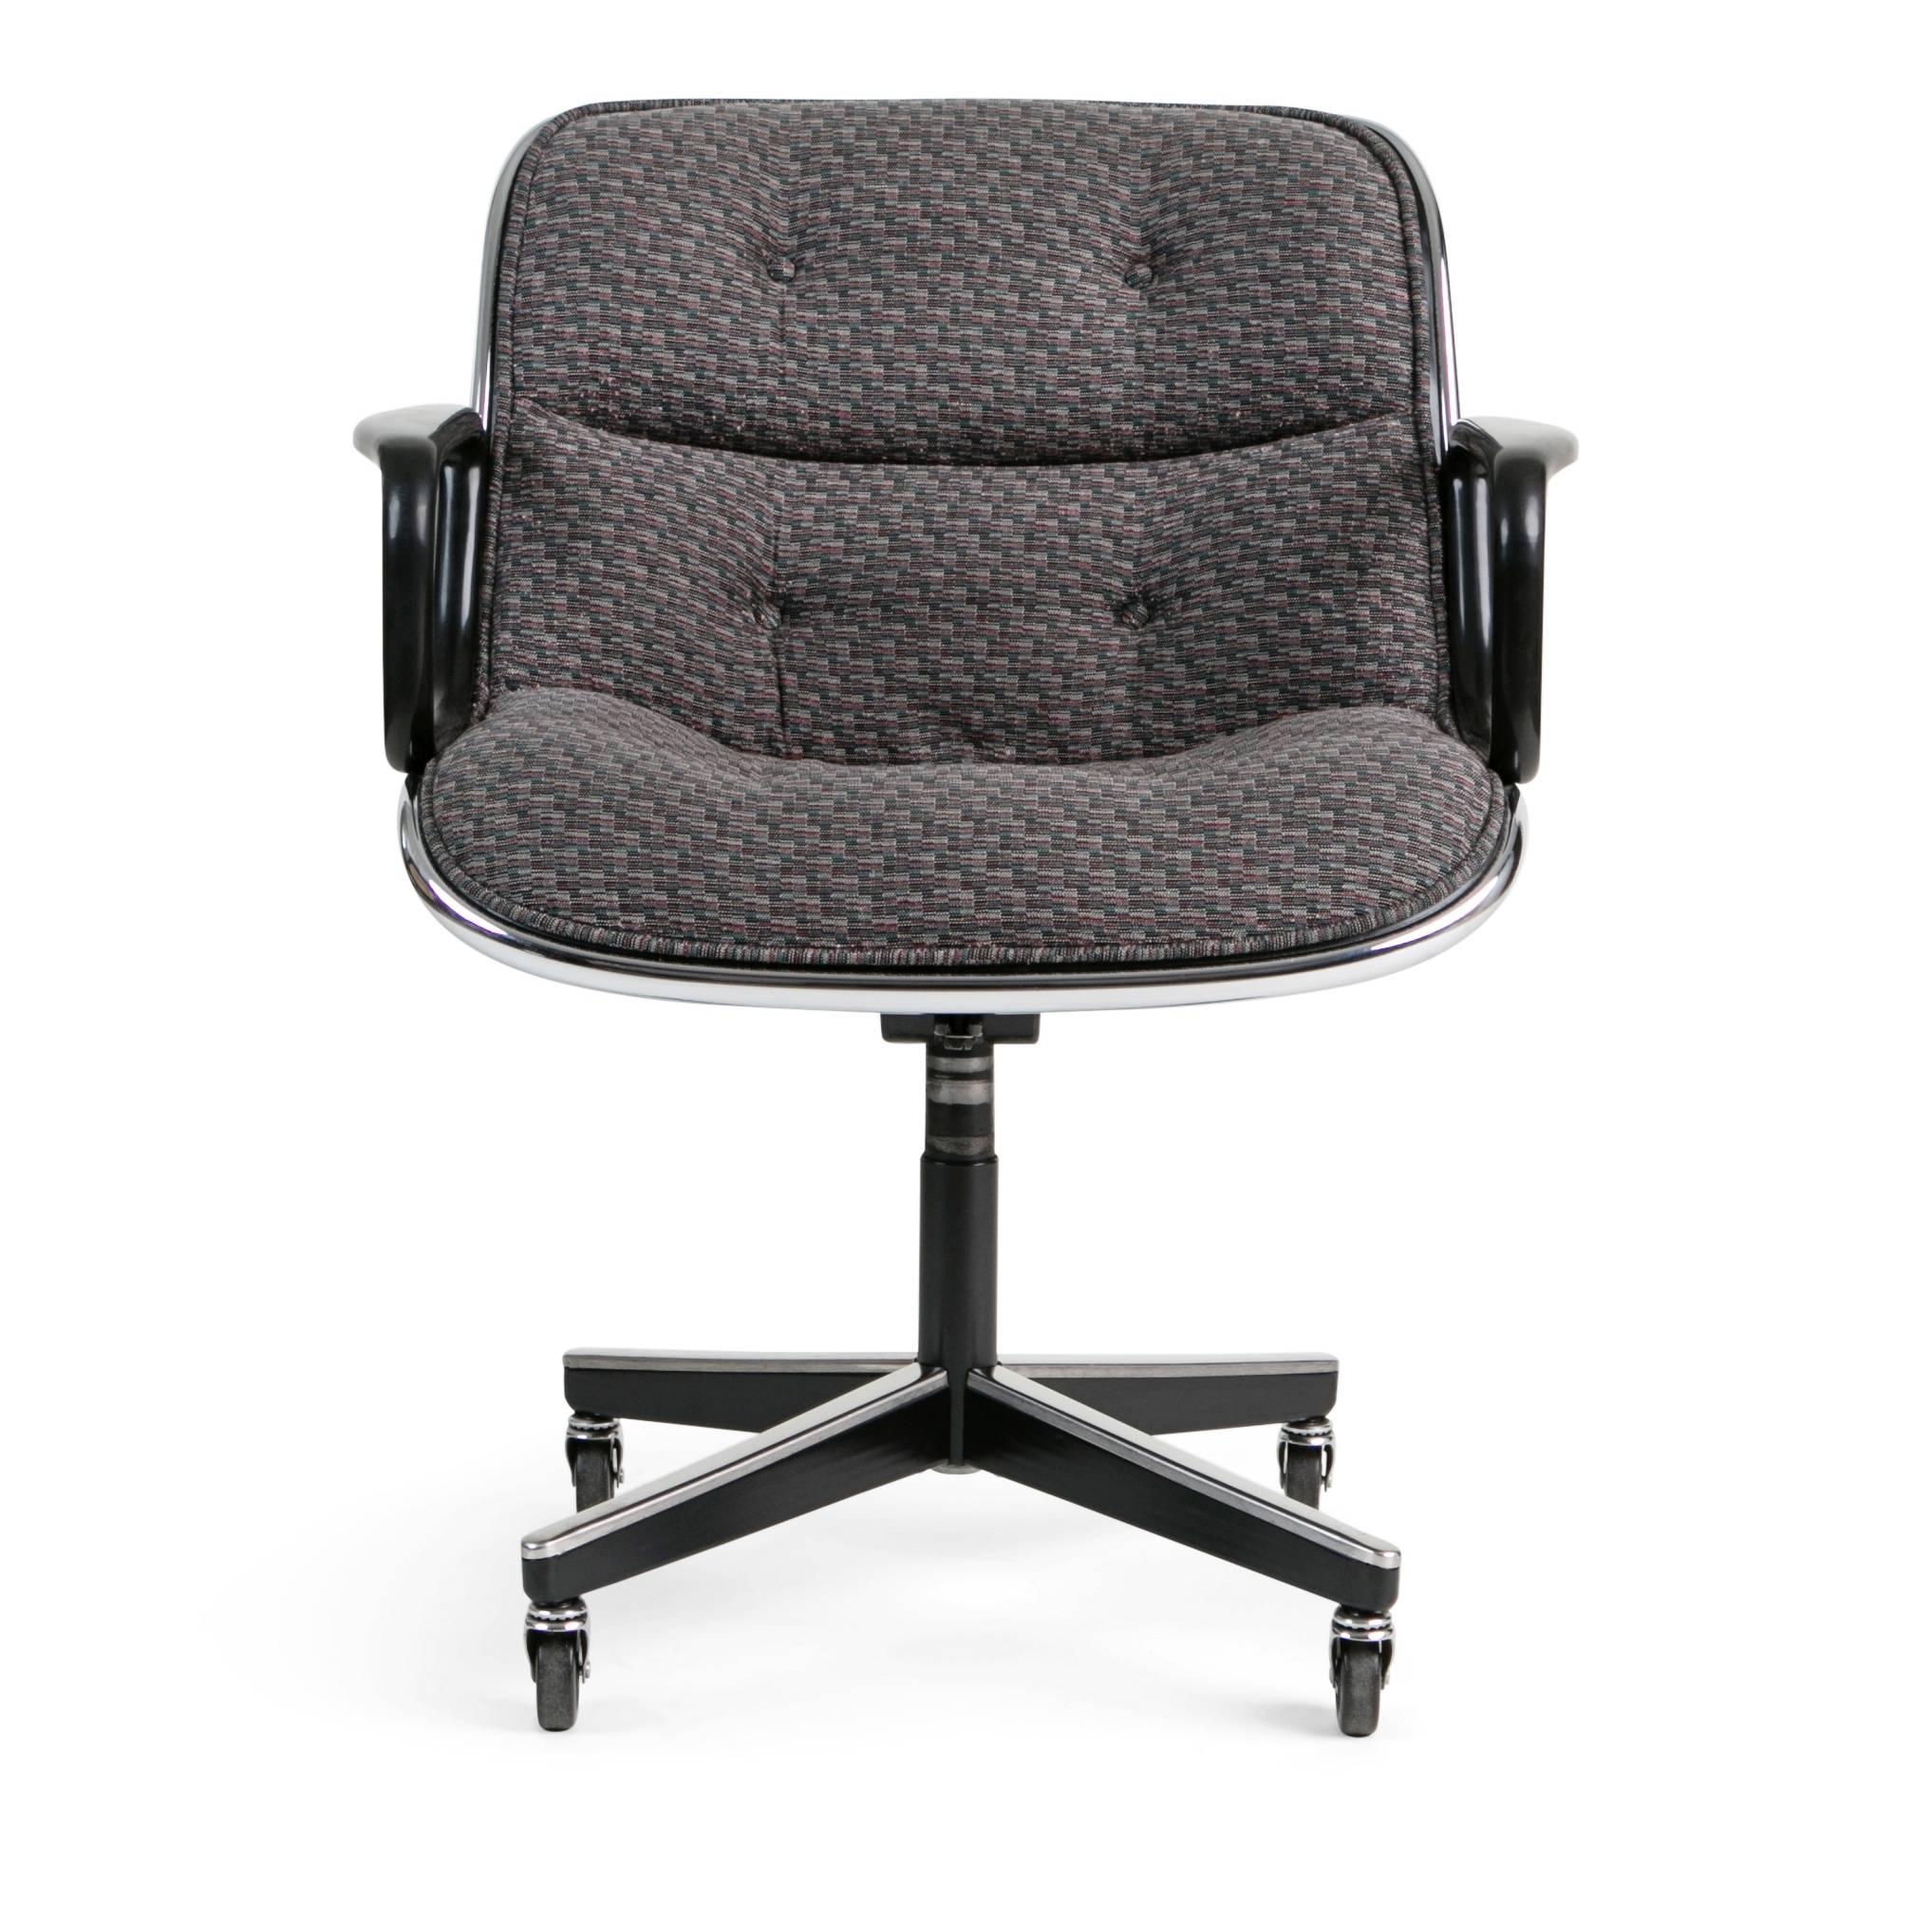 These are a great option for those who seek the classic Charles Pollock for Knoll International Executive desk chair but would prefer a non-leather (vegan) option. The fabric has a very cool looking design and is in amazing condition especially